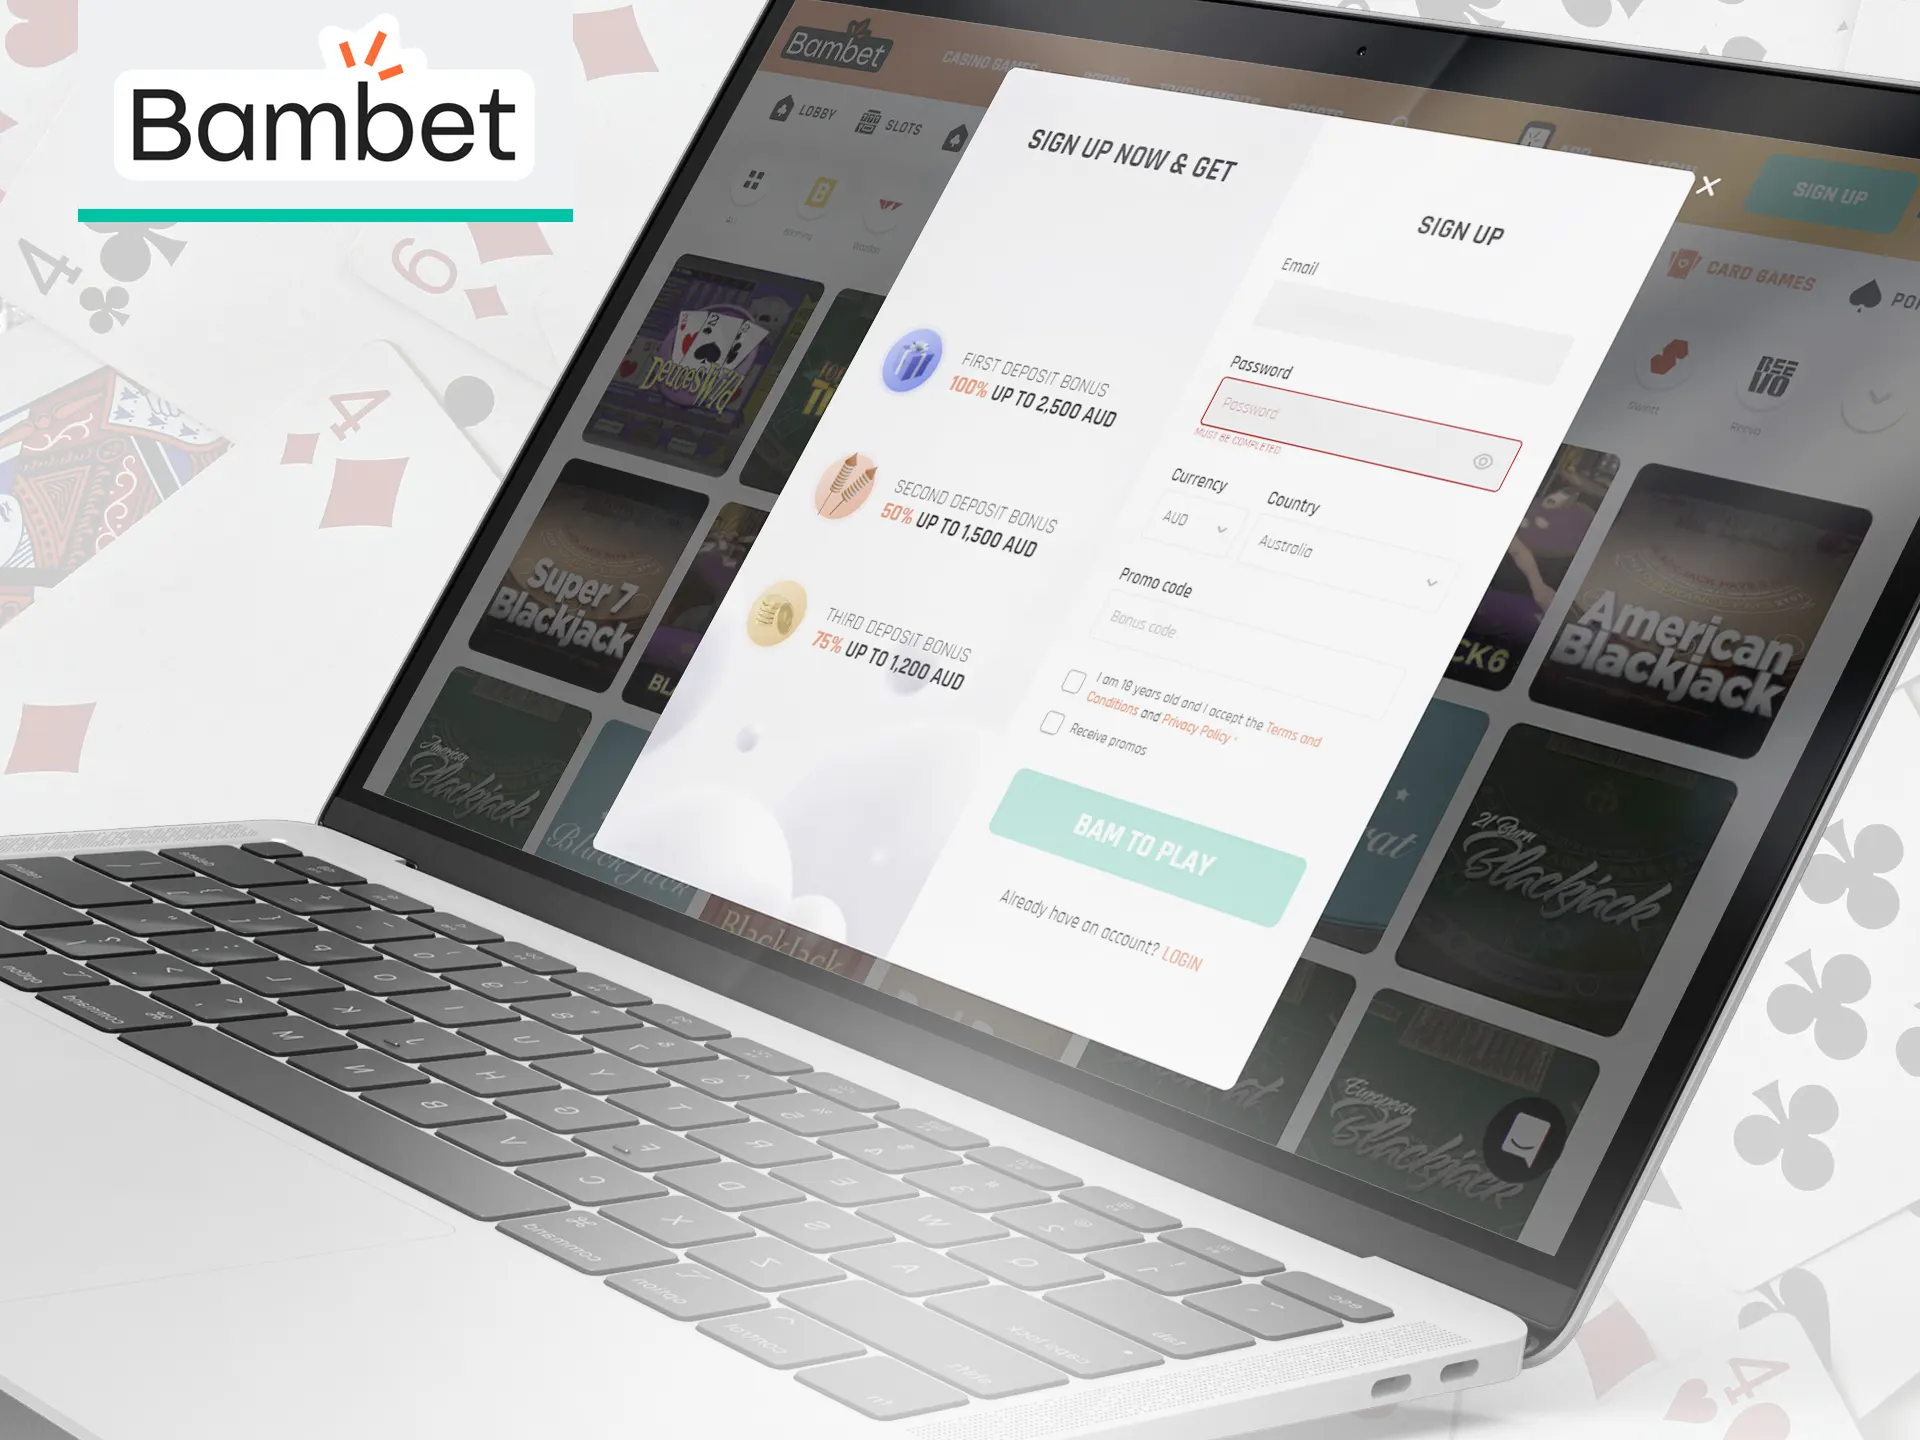 Go through the registration process on the Bambet website.